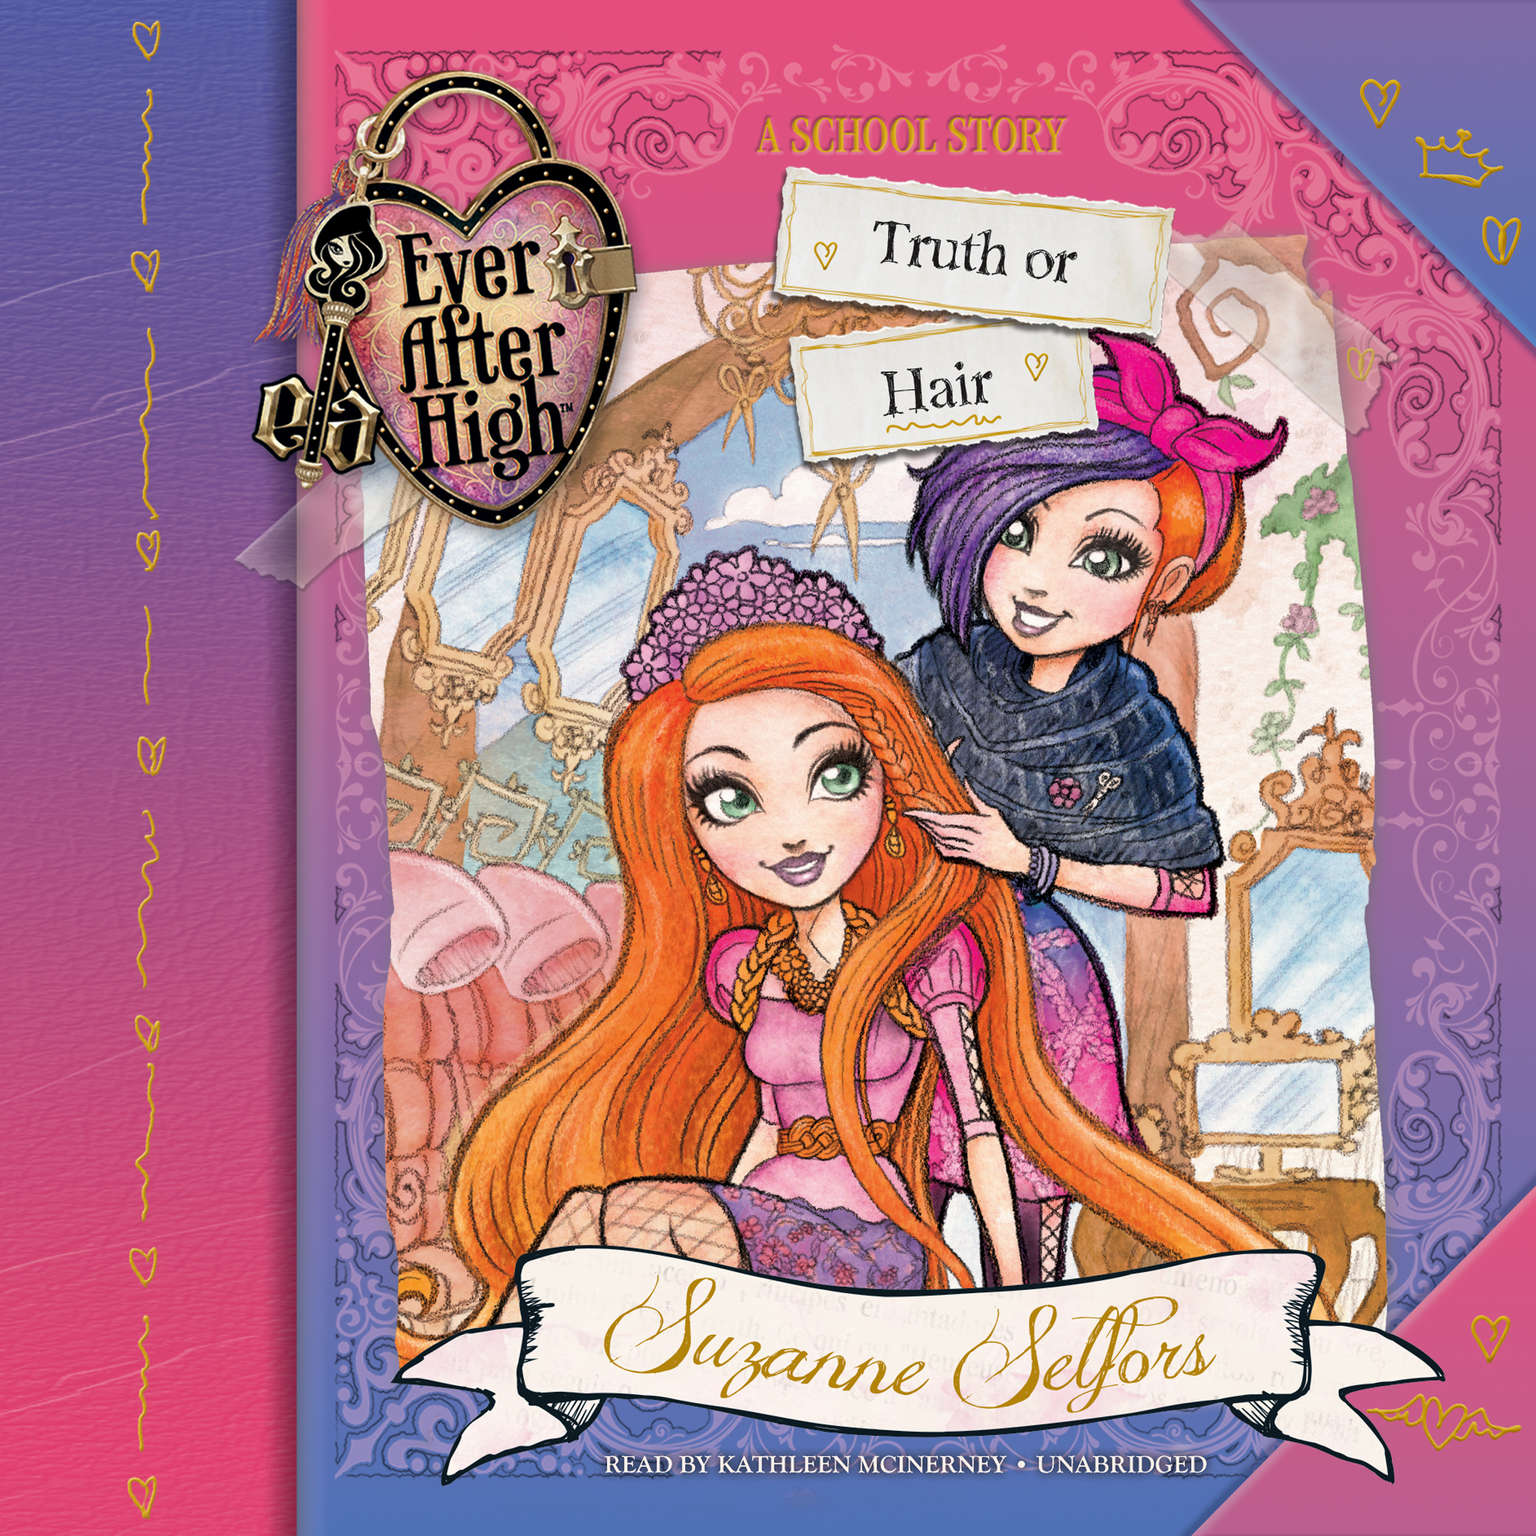 Ever After High: Truth or Hair Audiobook, by Suzanne Selfors